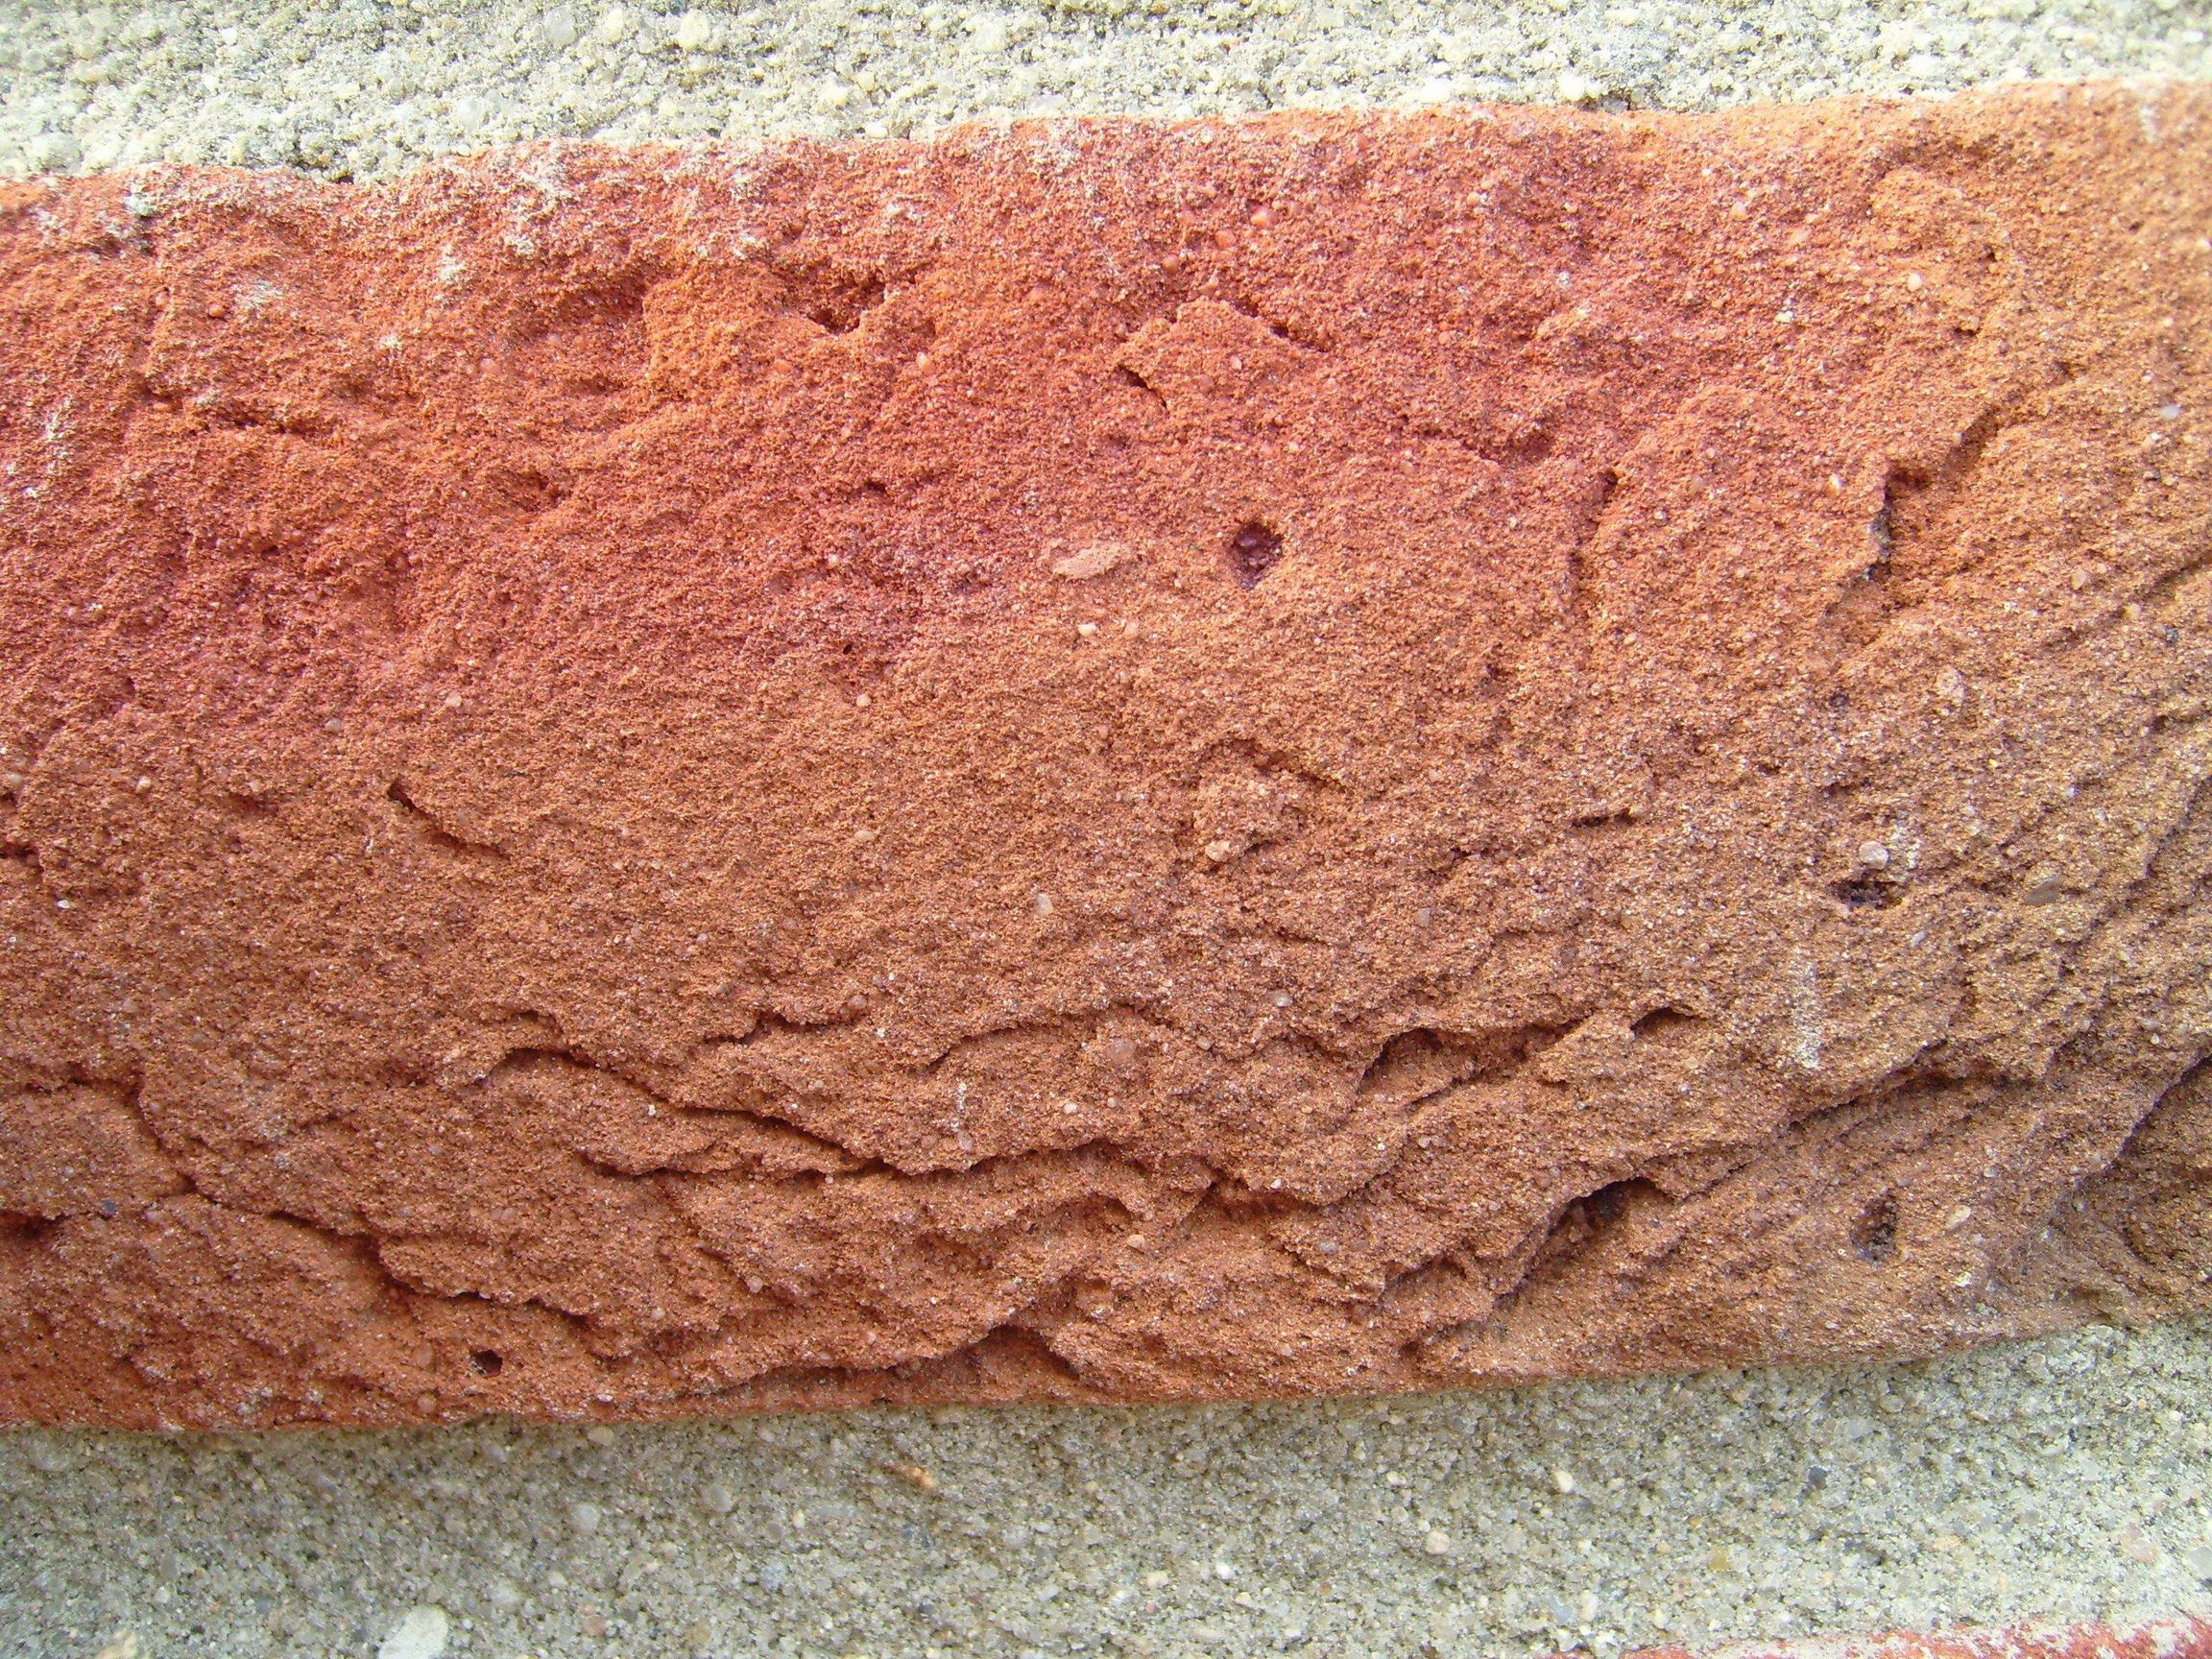 File:Brick in wall close up.jpg - Wikimedia Commons